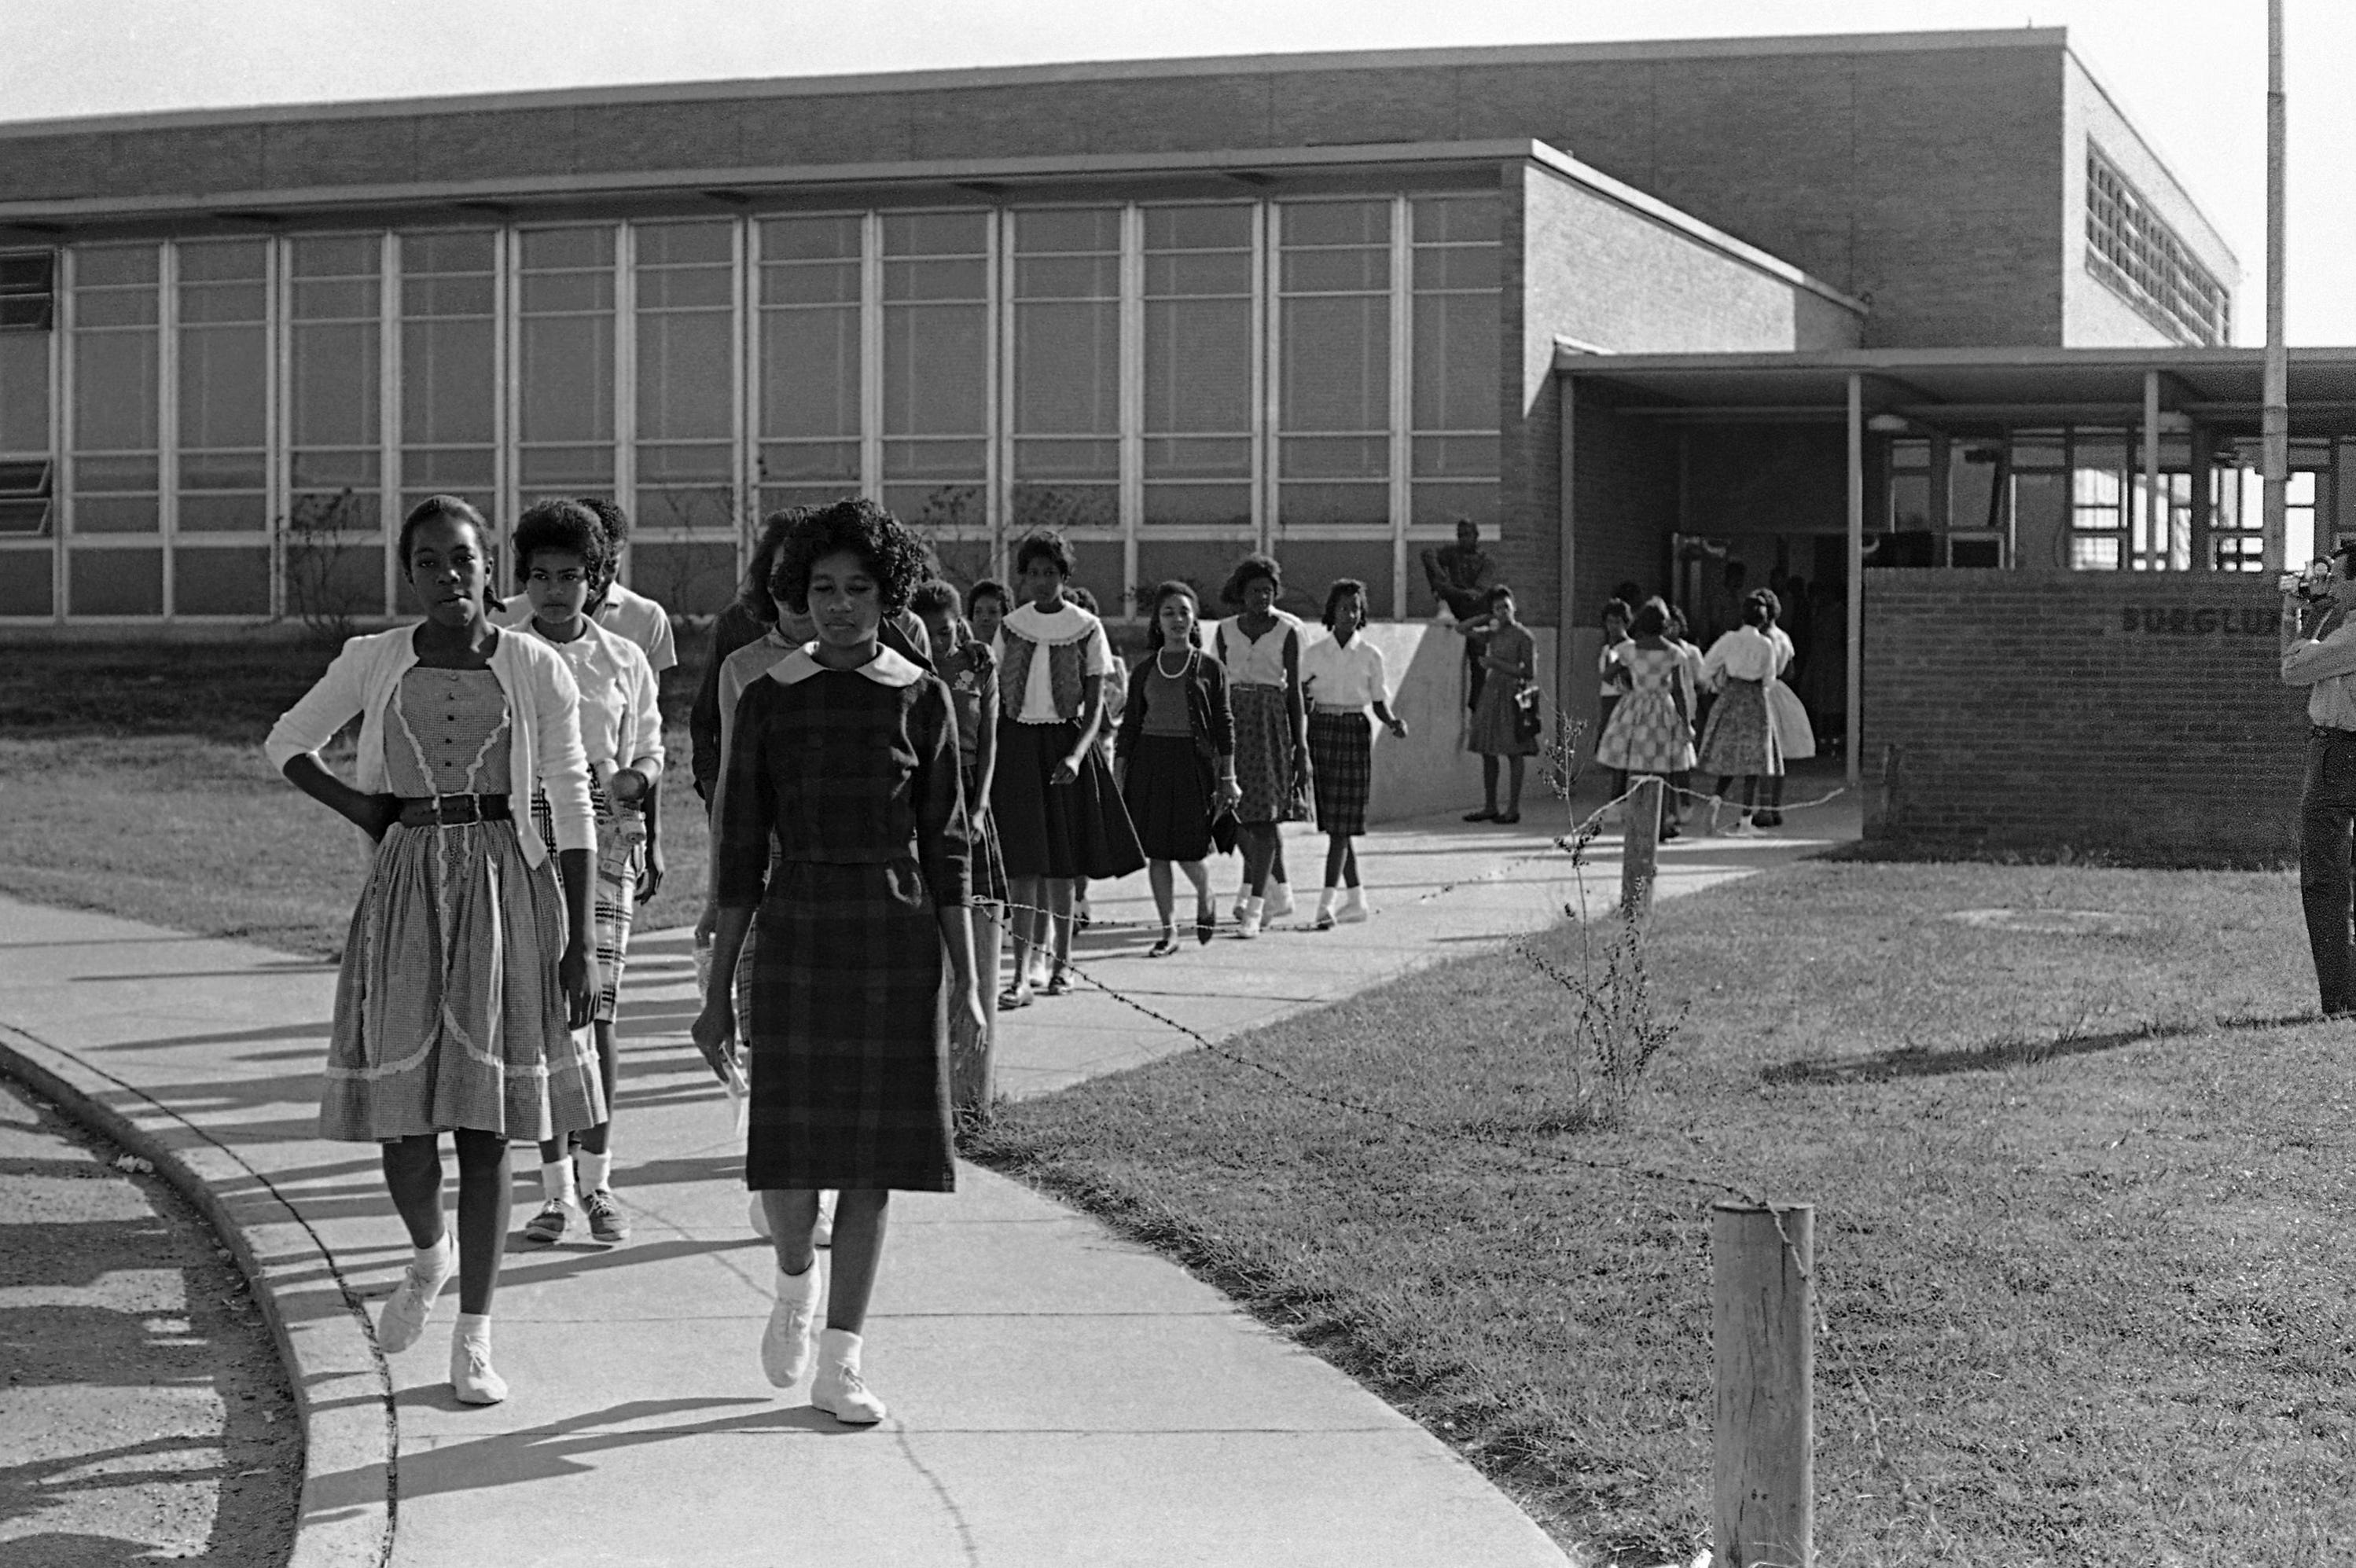 Black students walked out of Burglund High School in McComb, Miss., on Oct. 12, 1961. The walkout was the second in a month at the high school. On Oct. 4, 1961, more than 100 students walked out to protest the expulsion of fellow student Brenda Travis. Some students later refused to sign pledges that they would not participate in civil rights demonstrations and walked out of school in protest.